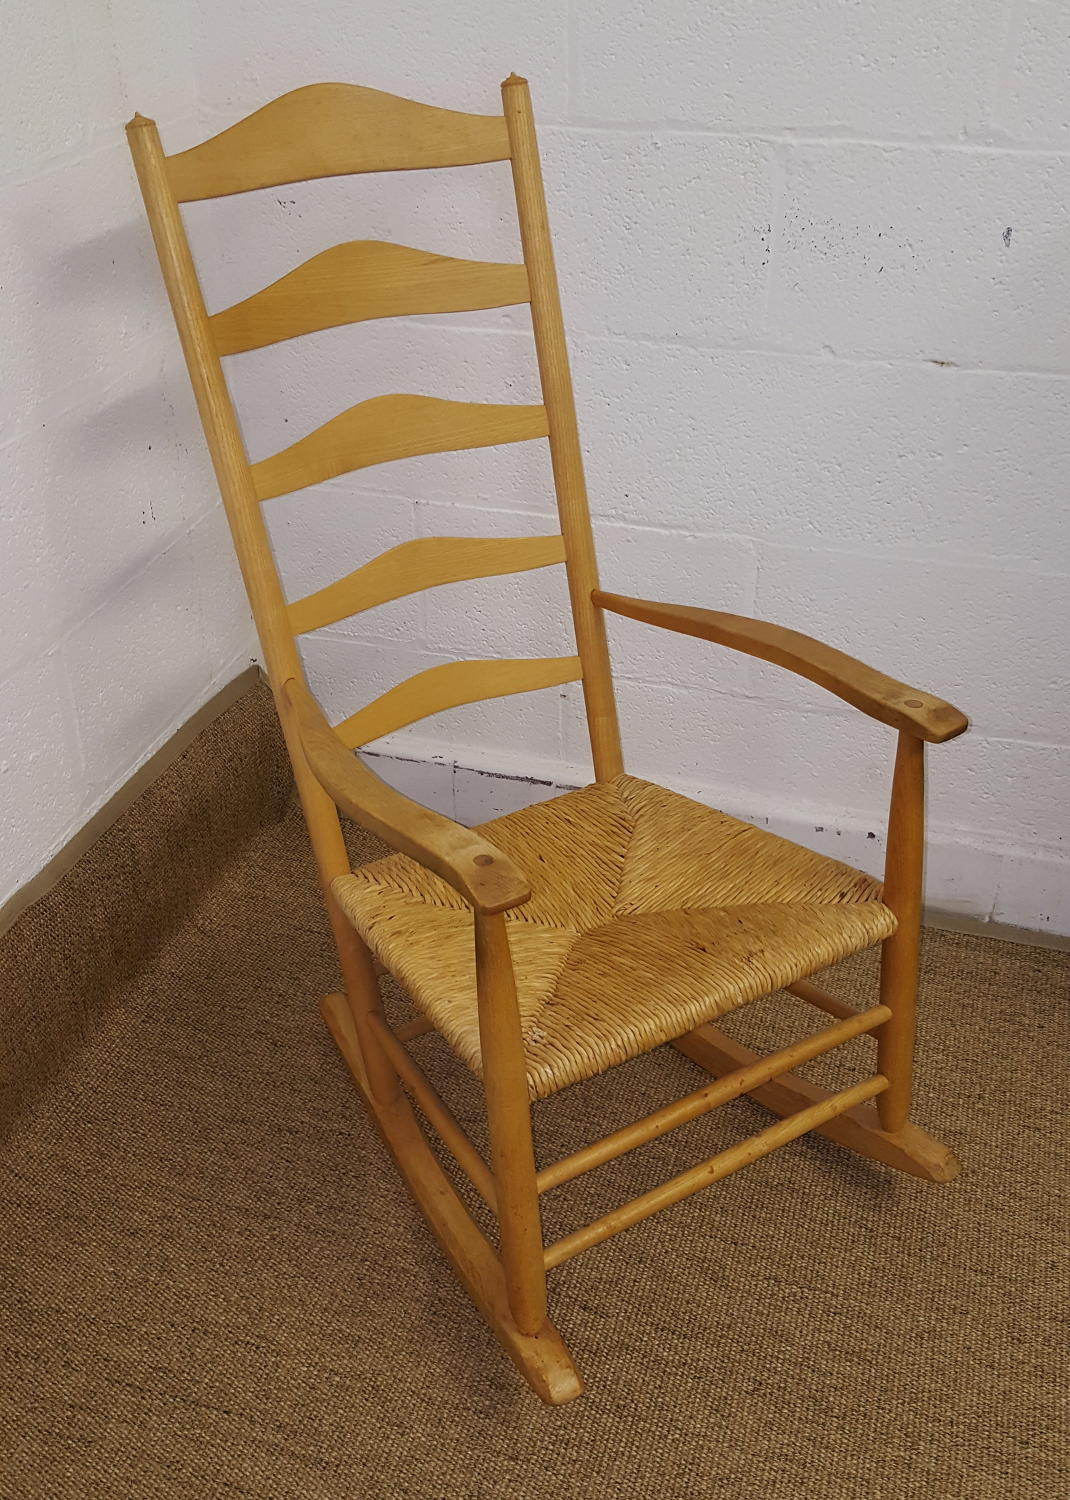 NEVILLE NEAL COTSWOLD SCHOOL ROCKING CHAIR